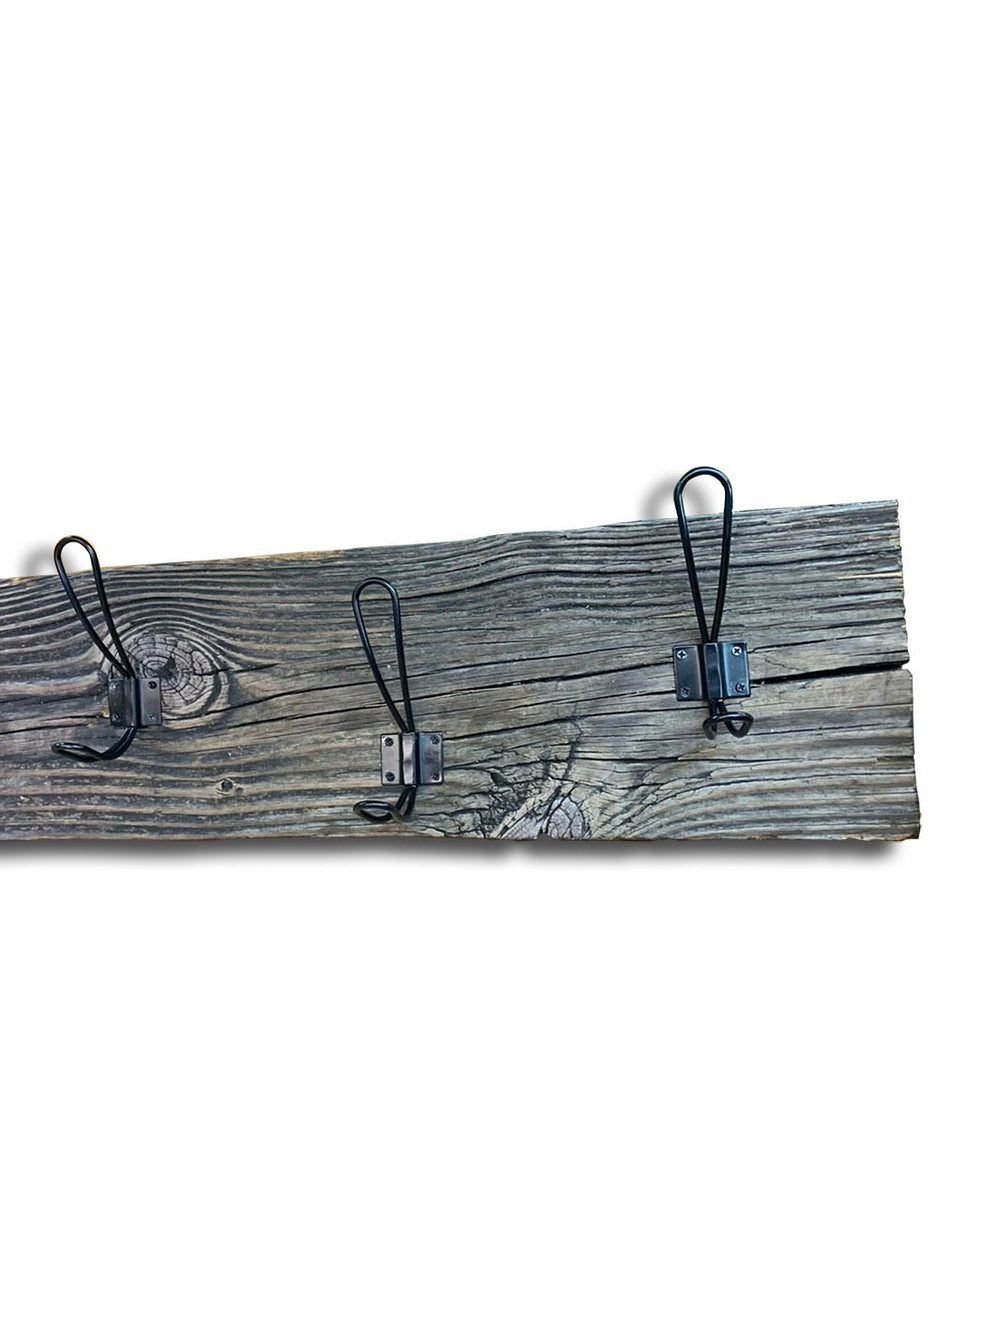 Handcrafted Distressed Wood Rustic Tower / Coat Rack | Farmhouse Wooden Coat Rack DaddyO's Wall Shelves & Ledges DAD0504-1